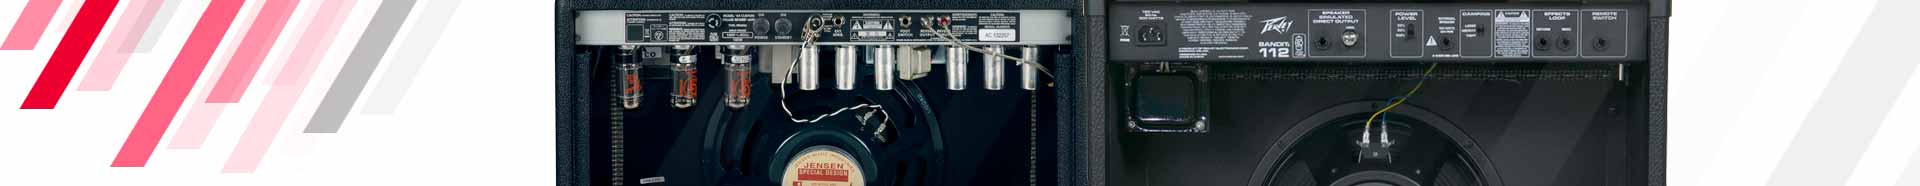 Tube Amps Vs. Solid State Amps